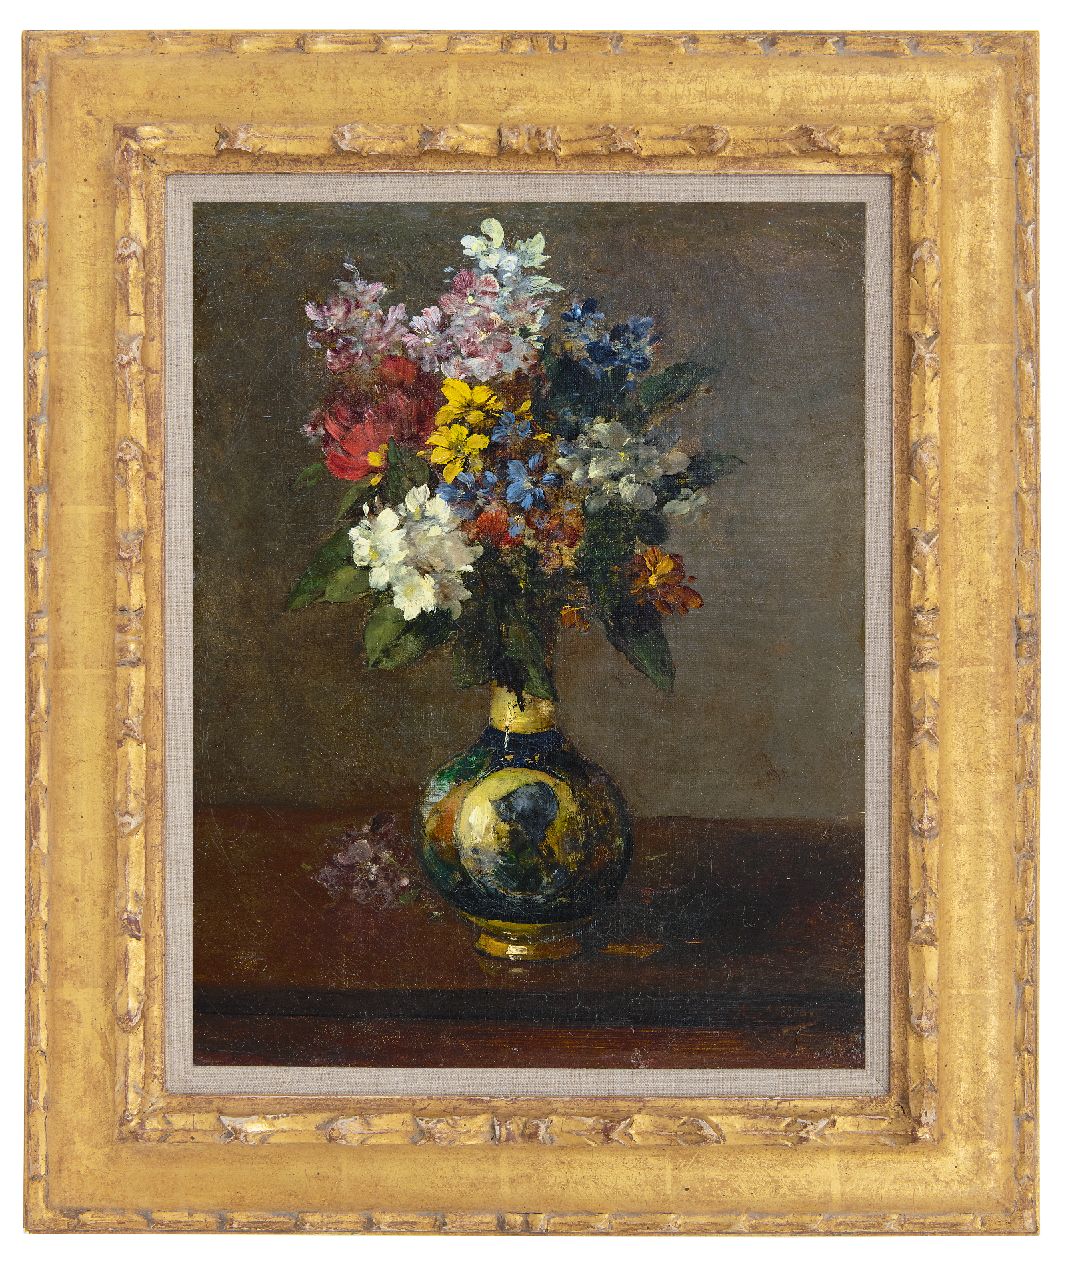 Vollon A.  | Antoine Vollon | Paintings offered for sale | Flowers in a vase, oil on canvas 41.4 x 32.0 cm, signed l.r.